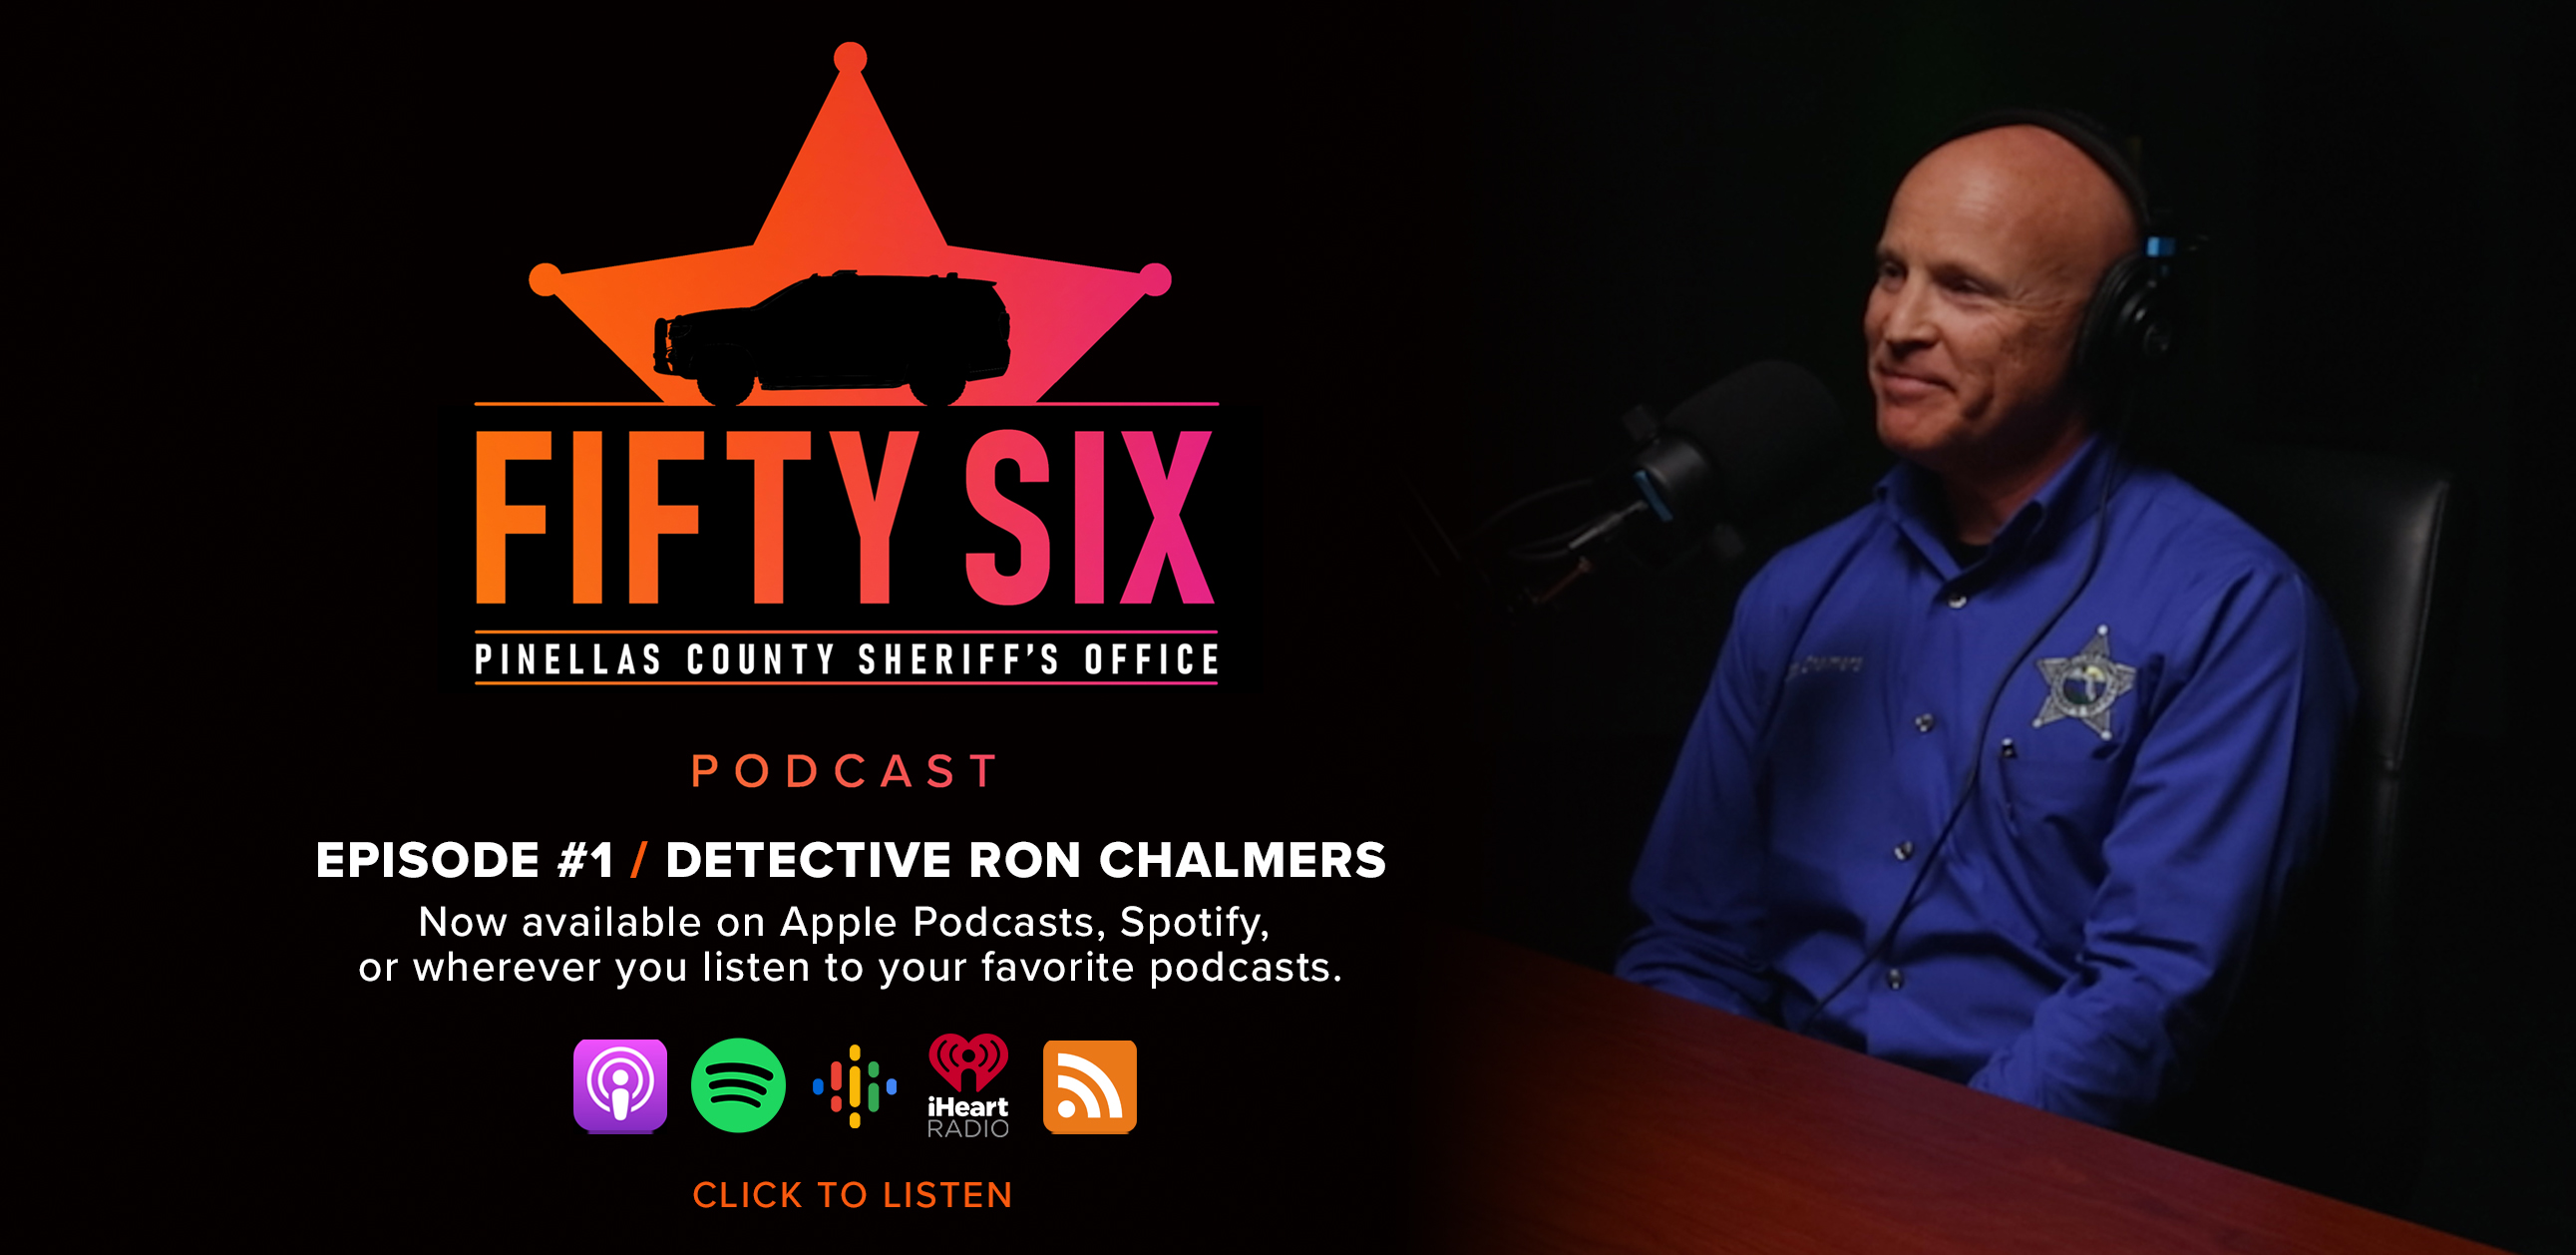 Fifty Six, Pinellas County Sheriff's Office Podcast, Episode #1 Detective Ron Chalmers, Now Available on Apple Podcasts, Click to Listen